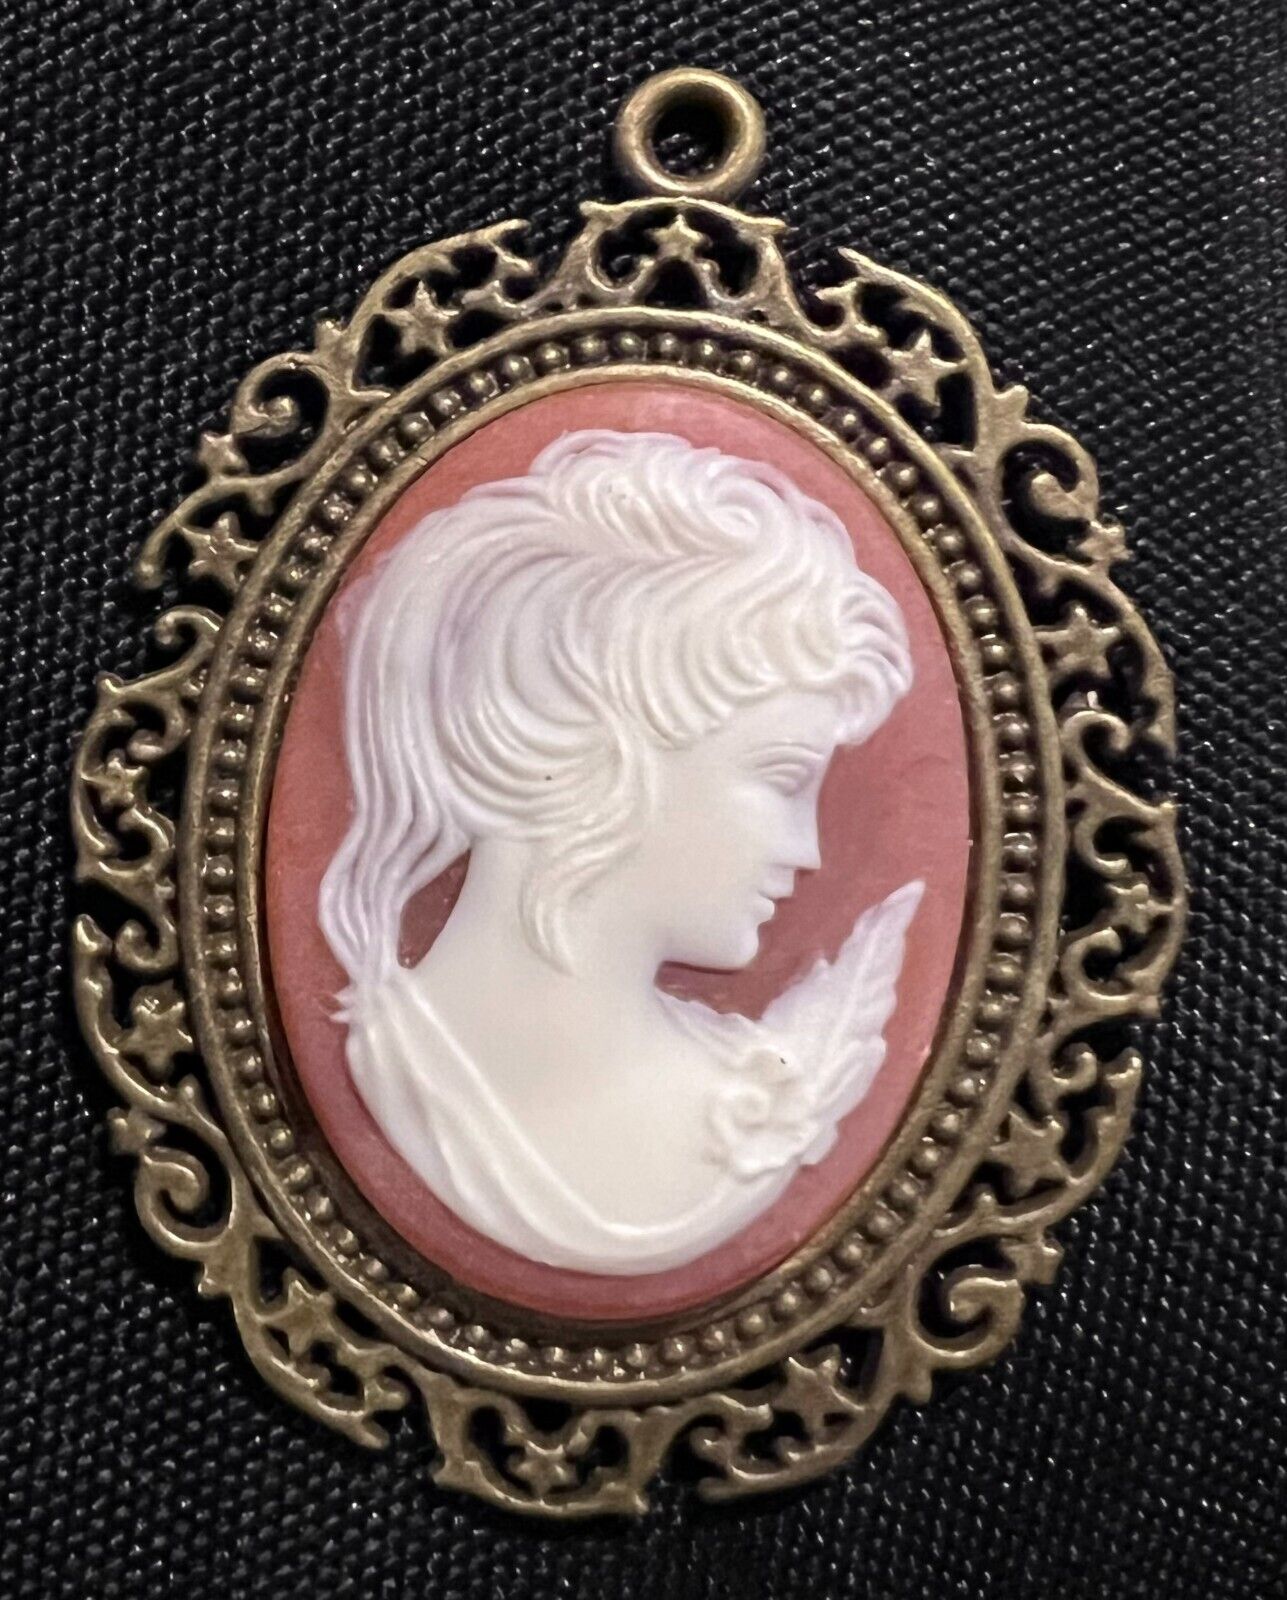 DISNEY Original Prop ~Cast Member Brooch (FREE IF SOMEONE SHOWS ME PHOTO OF USE)